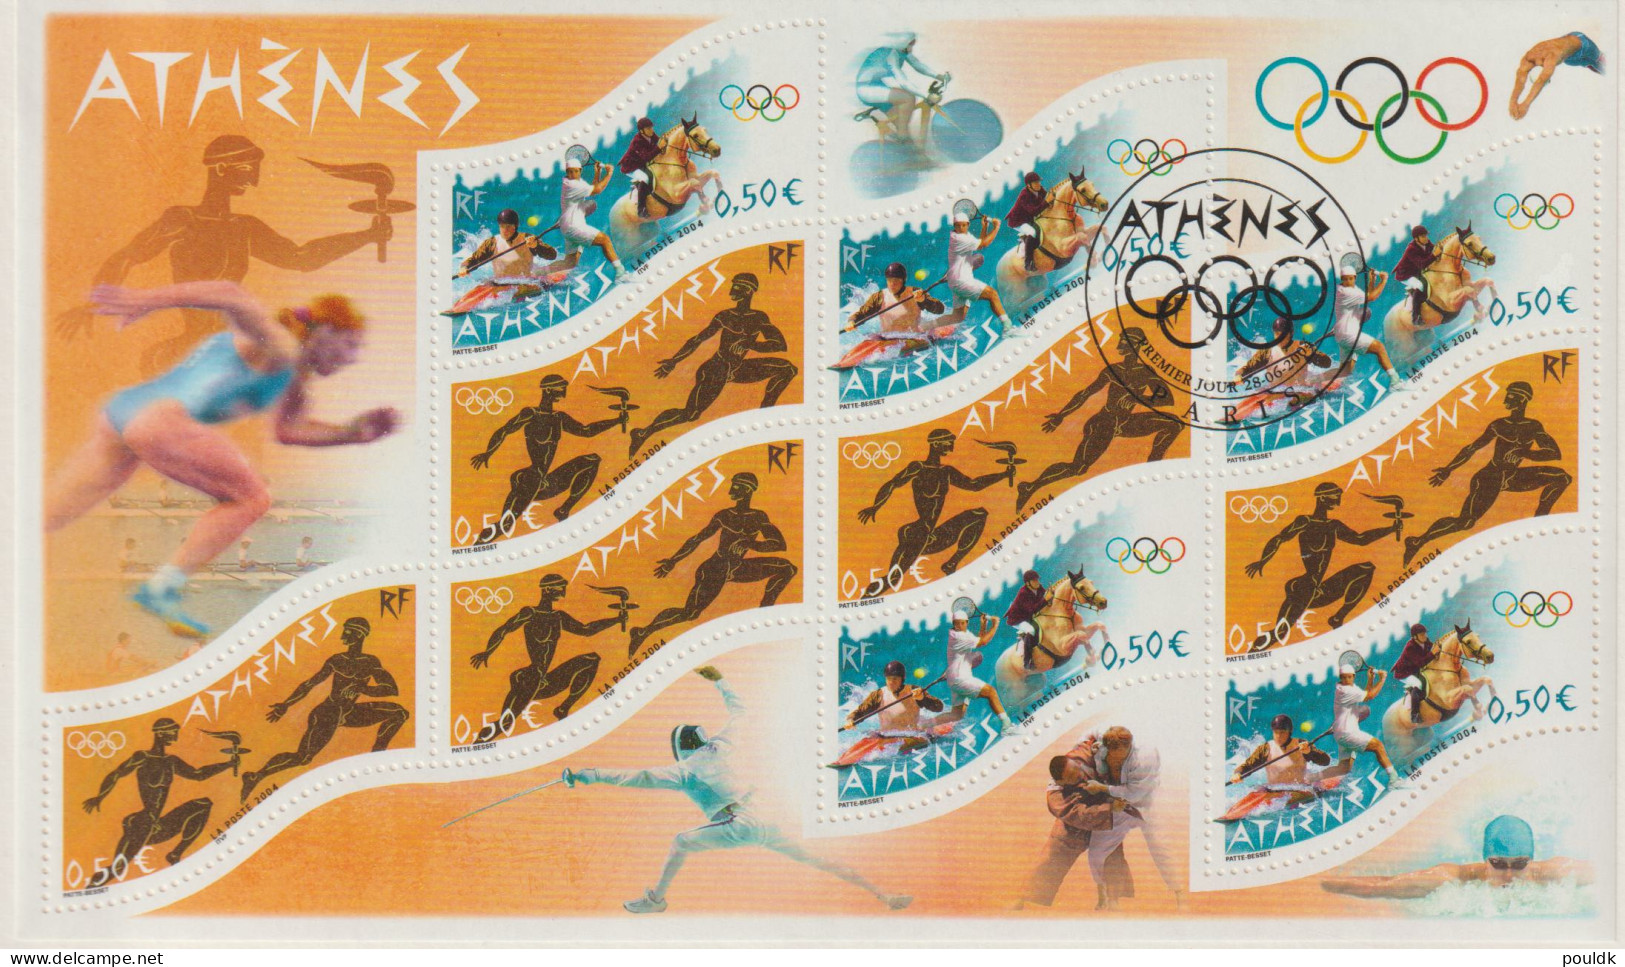 France 2004 Olympic Games Athens Souvenir Sheet Used On French Postal Folder. Postal Weight Approx 99 Gramms - Ete 2004: Athènes